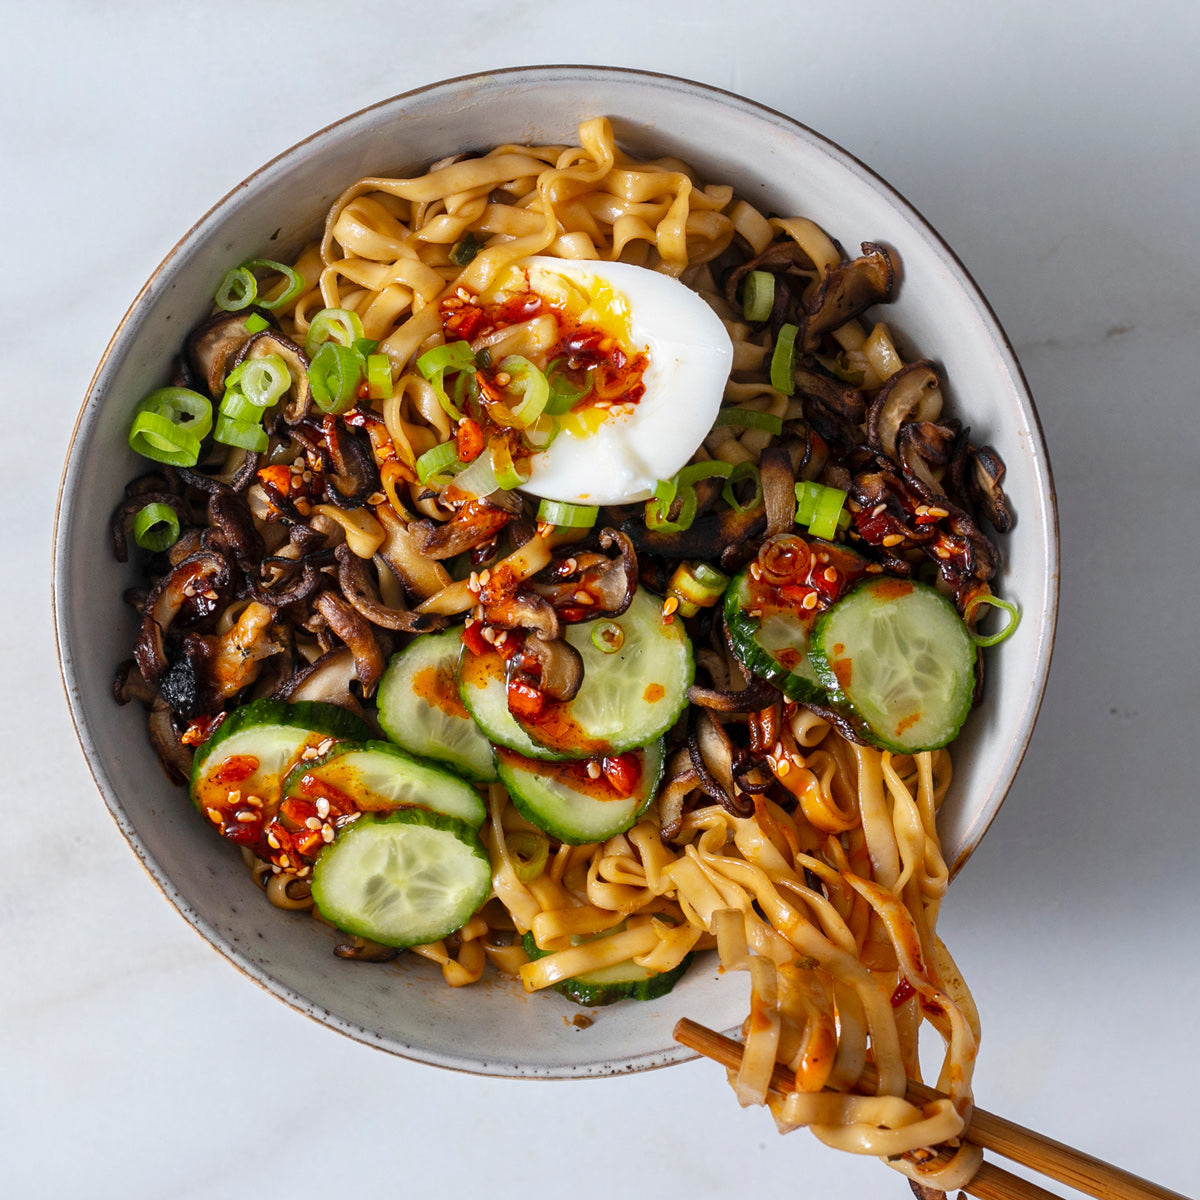 noodles with mushrooms, pickles, and chili crunch